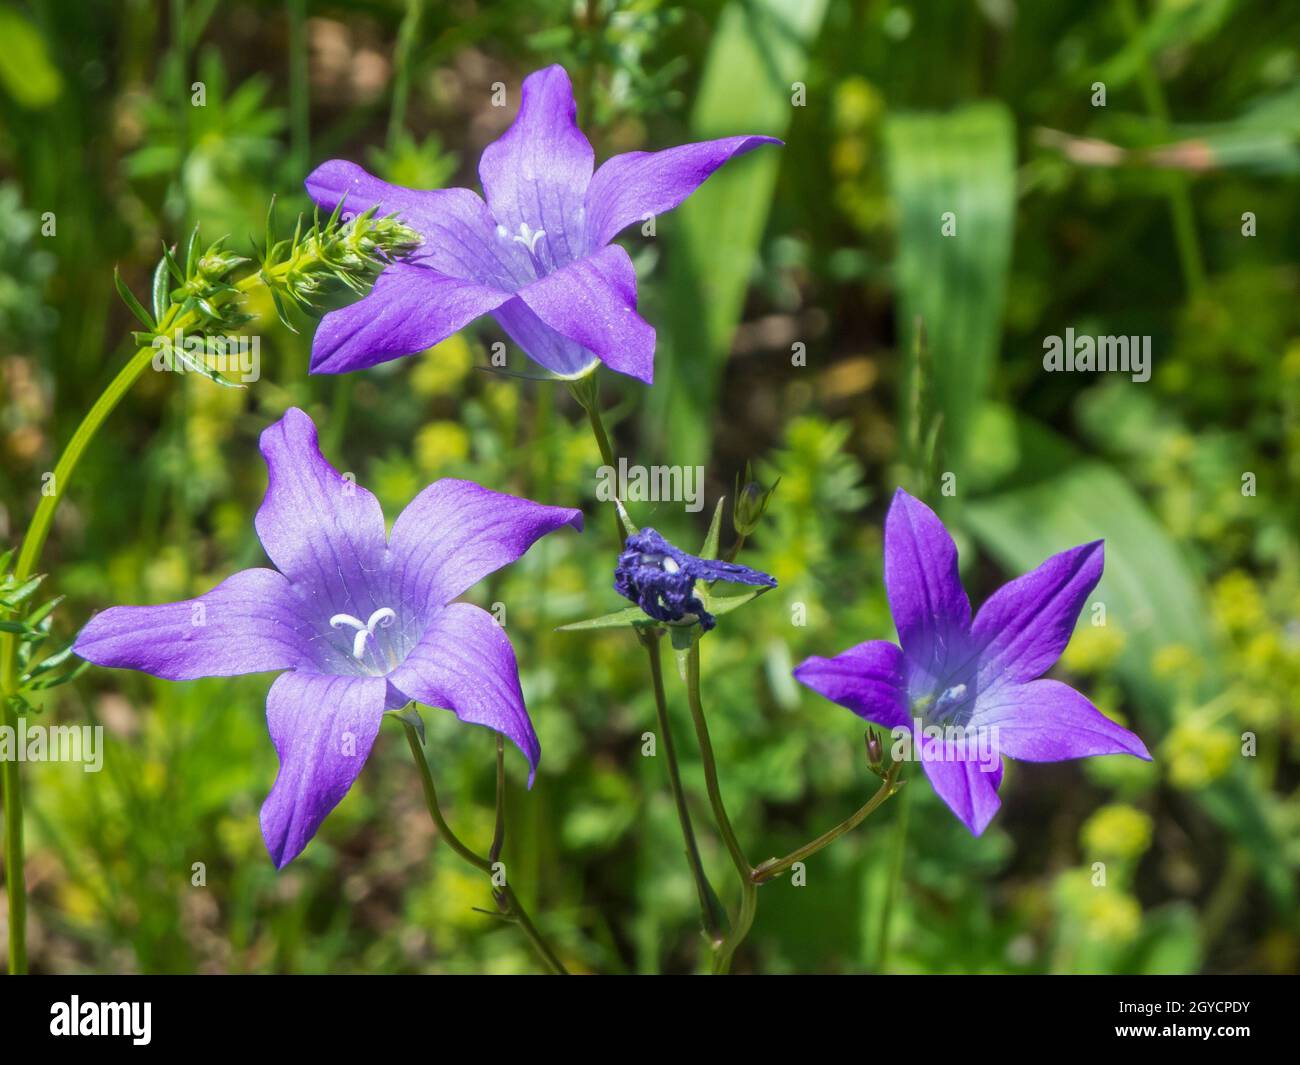 Close-up of three flowers of the broad-leaved bellflower (lat: Campanula latifolia) in front of a blurred natural background in Bavaria. Stock Photo